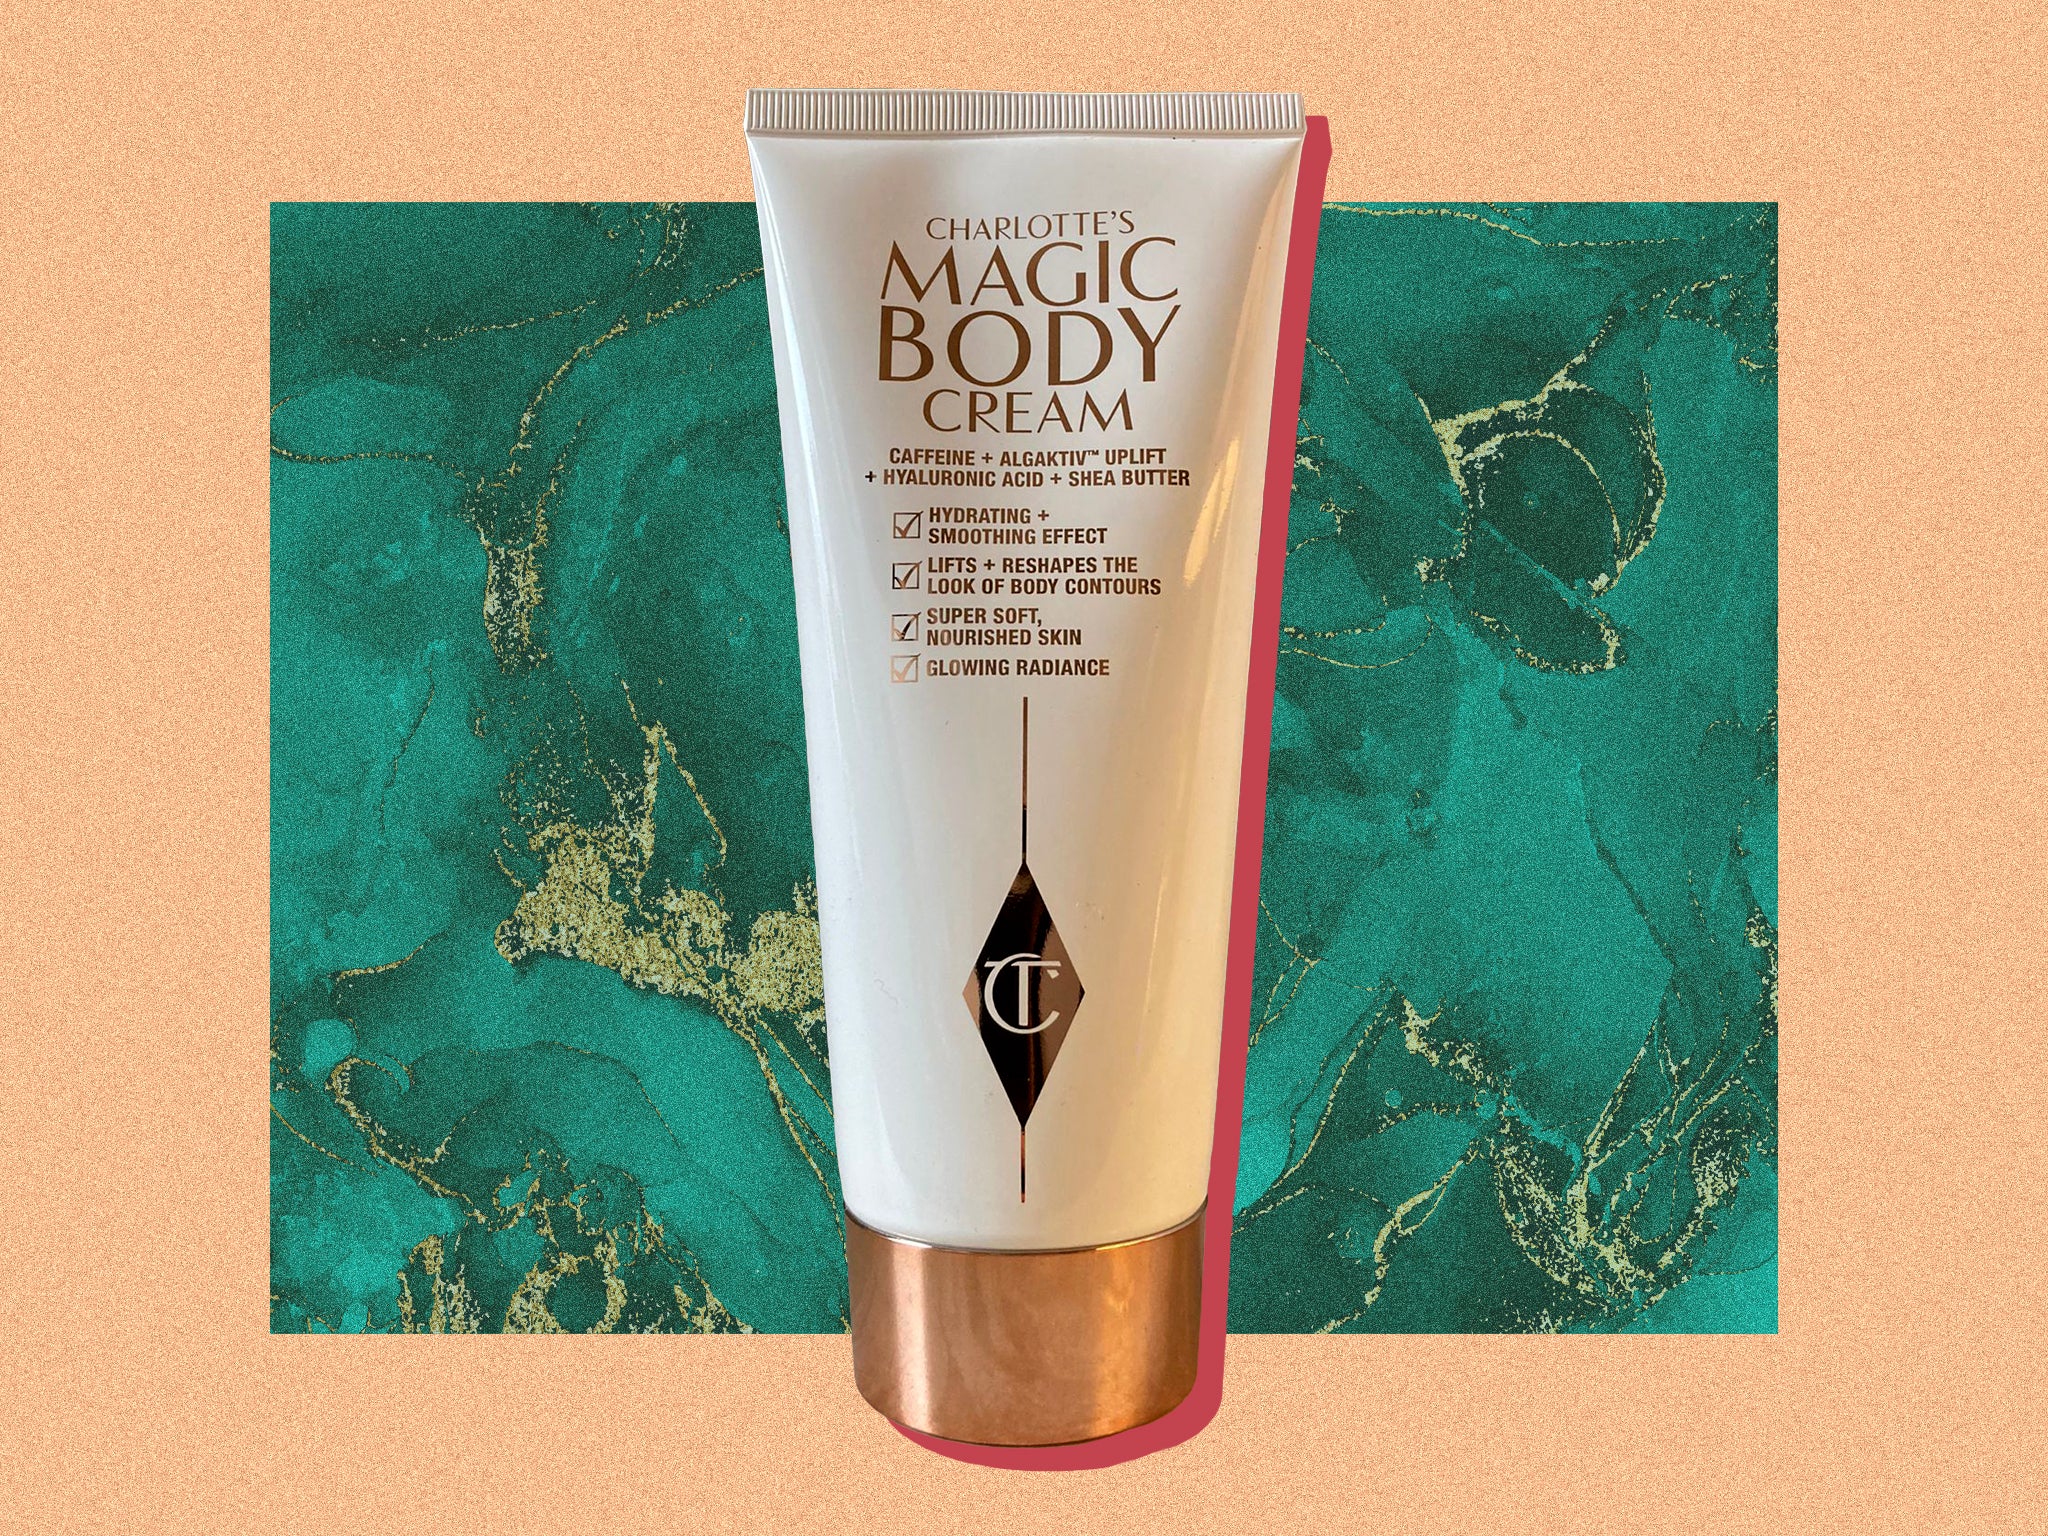 Charlotte Tilbury’s magic body cream has landed – and I tried it ahead of its launch